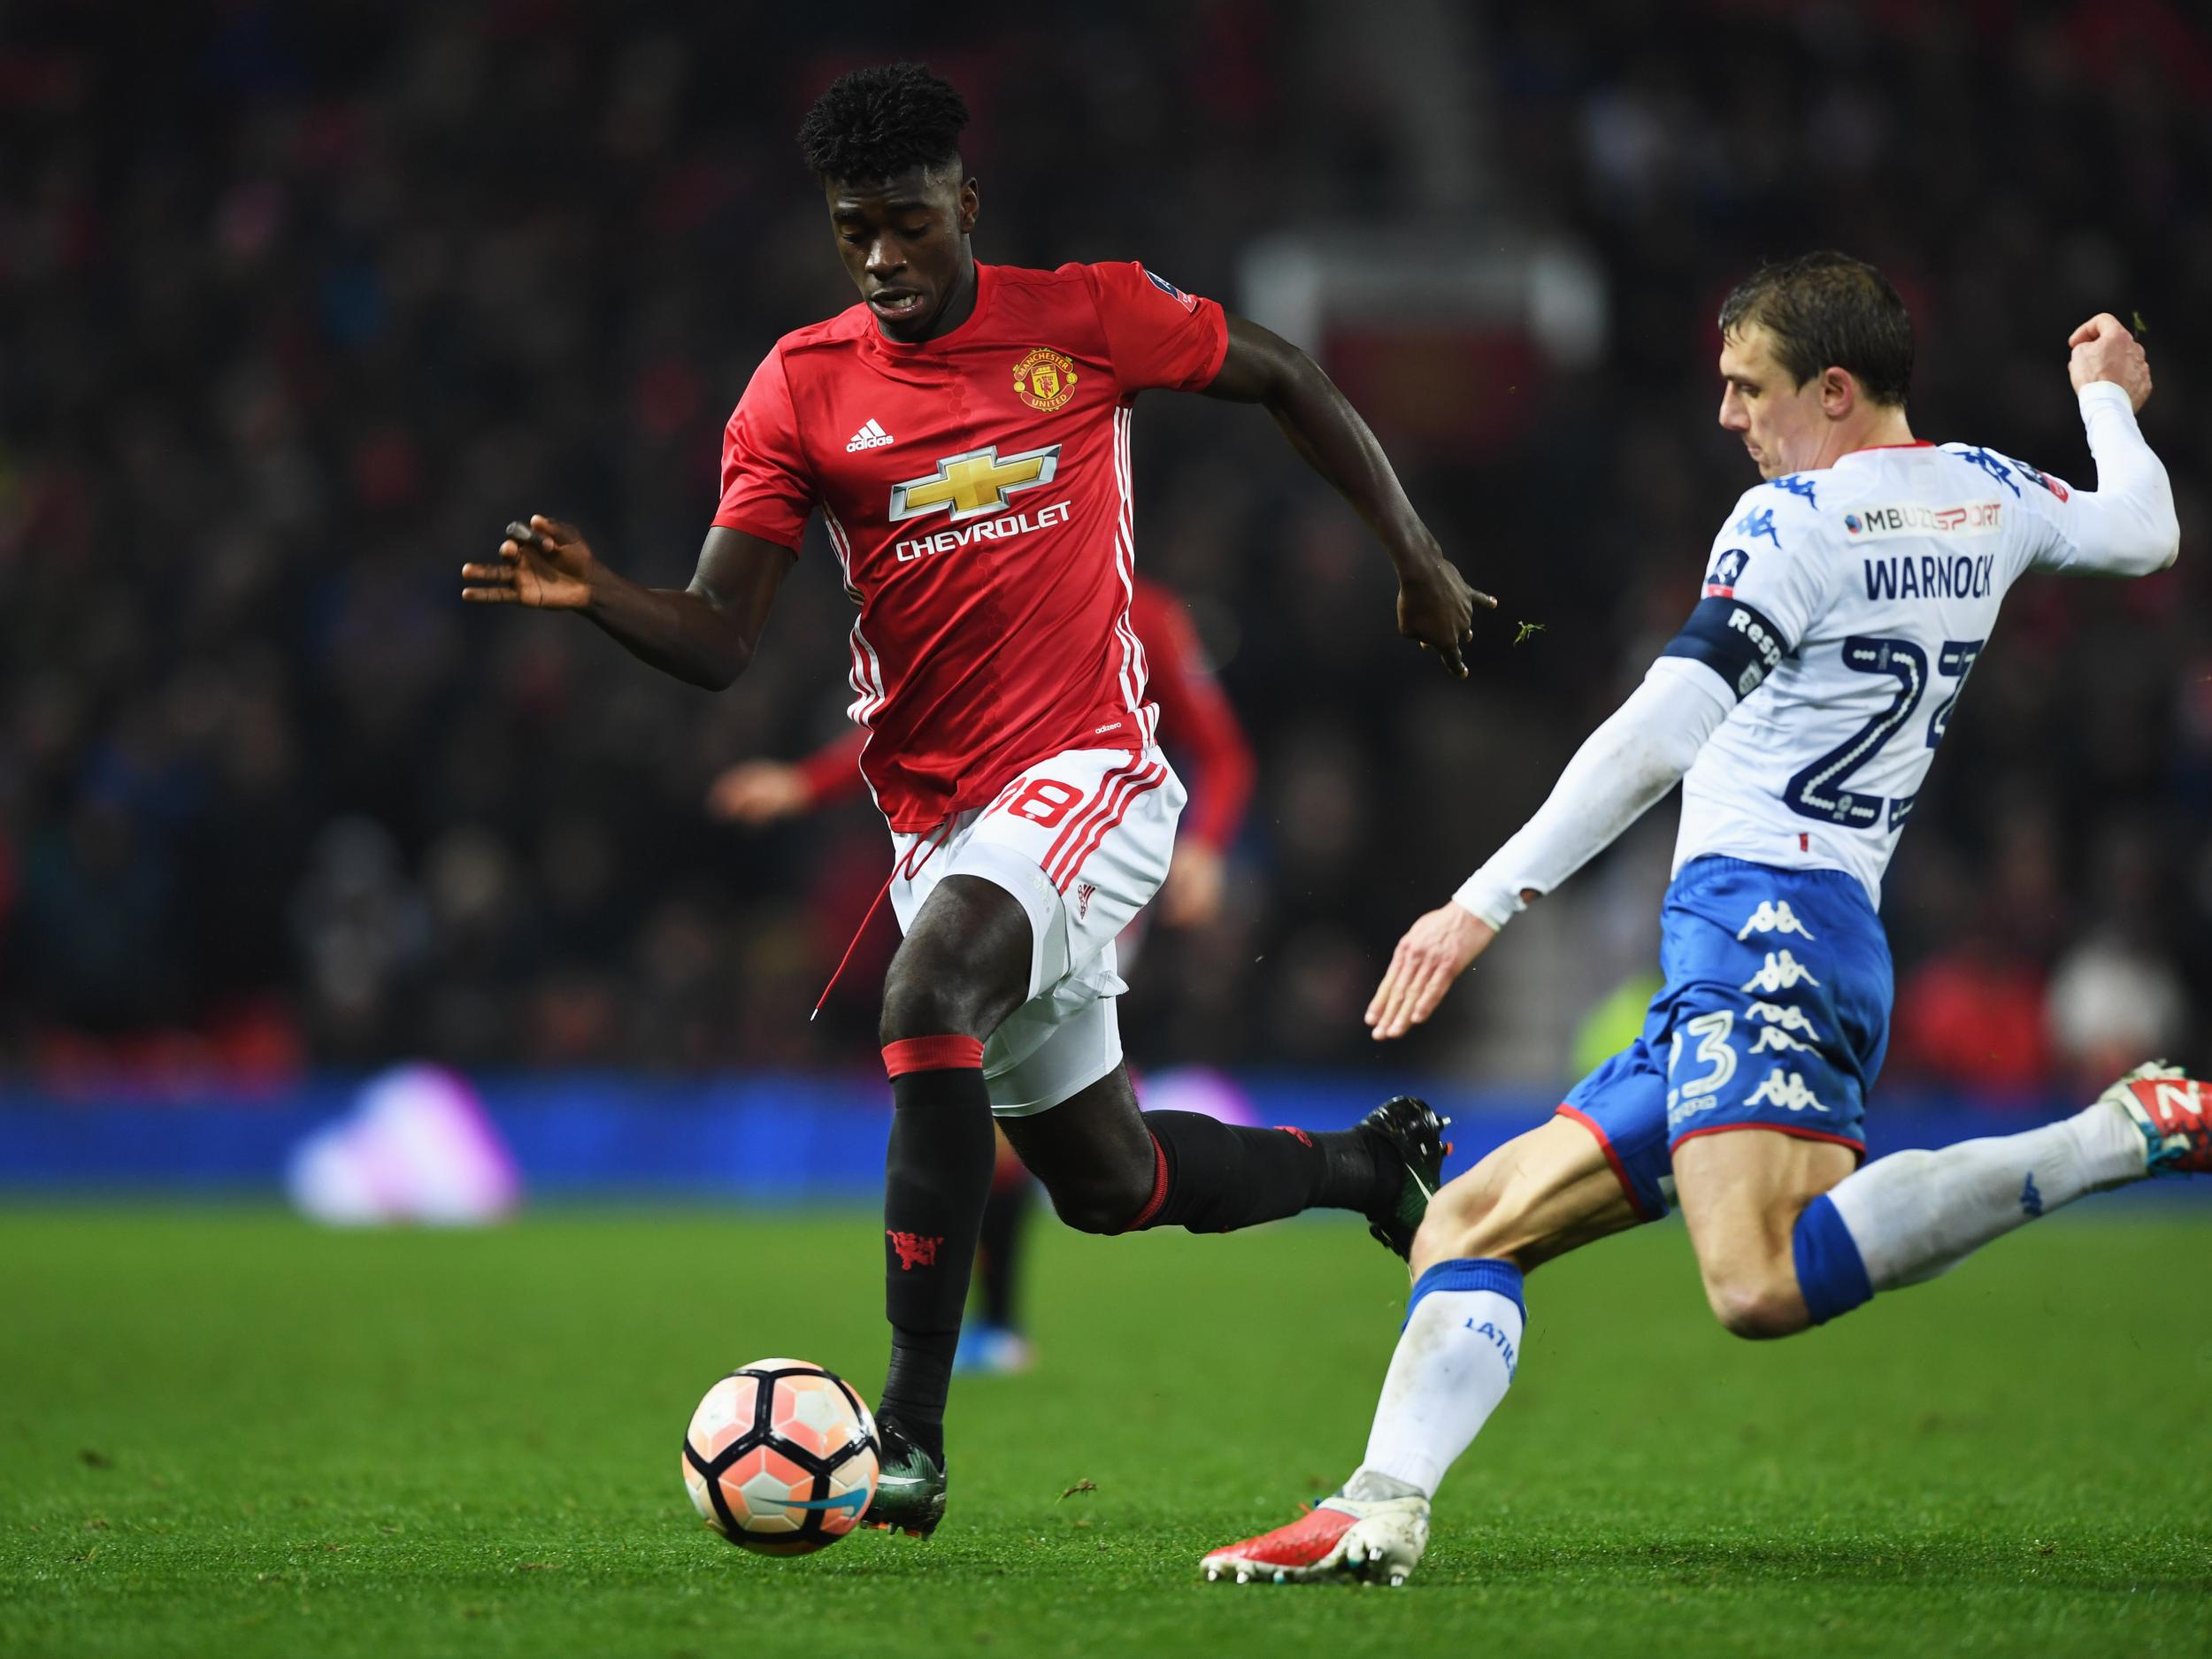 The full-back made his United debut in a 4-0 FA Cup win against Wigan